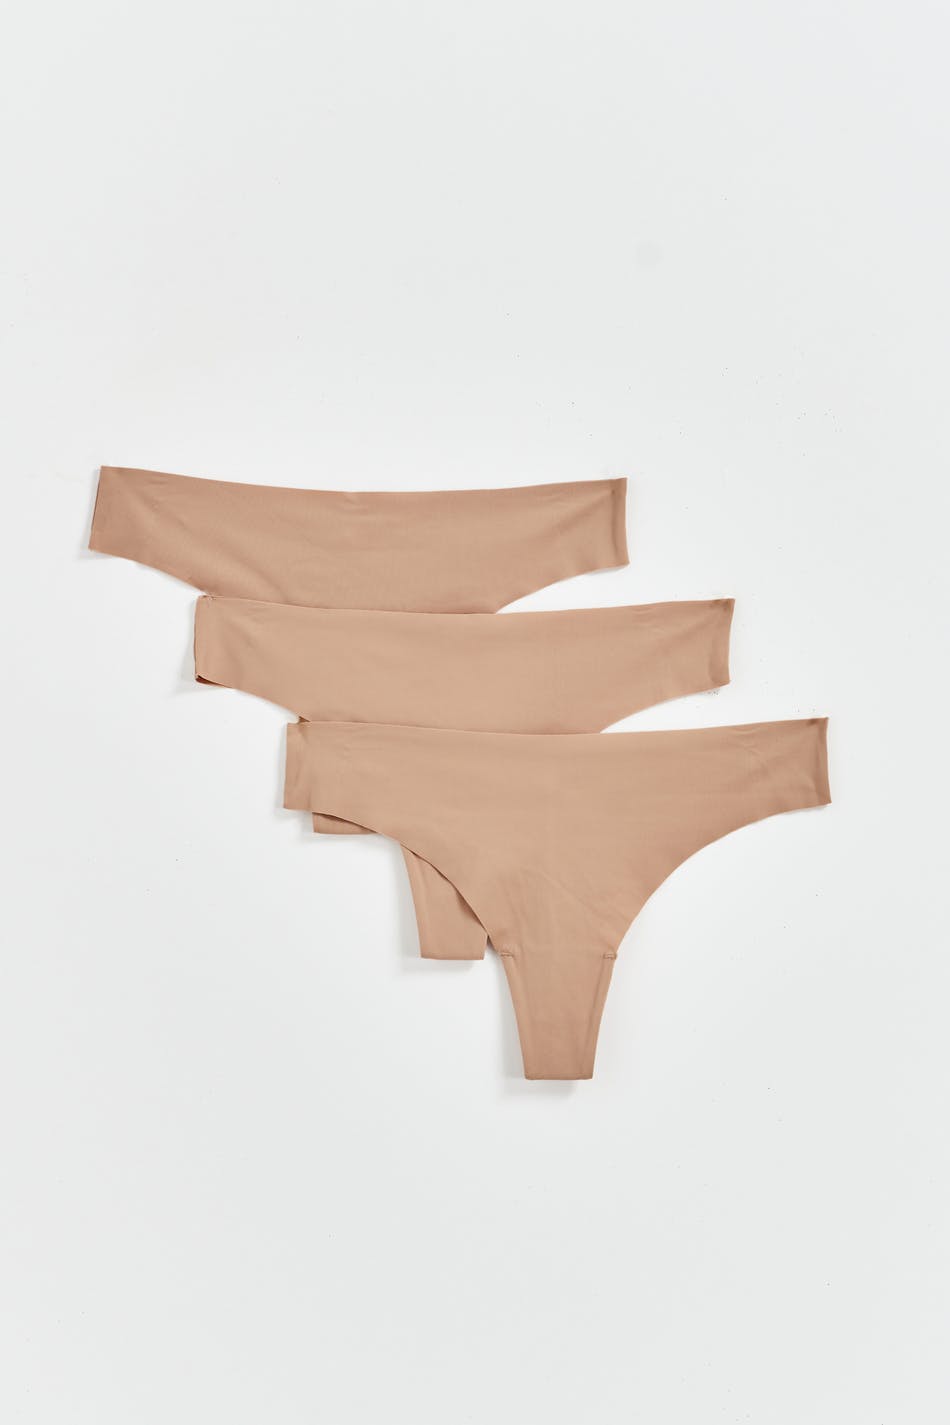 Gina Tricot - 3-pack invisible thong - trosor-3-pack - Beige - L - Female